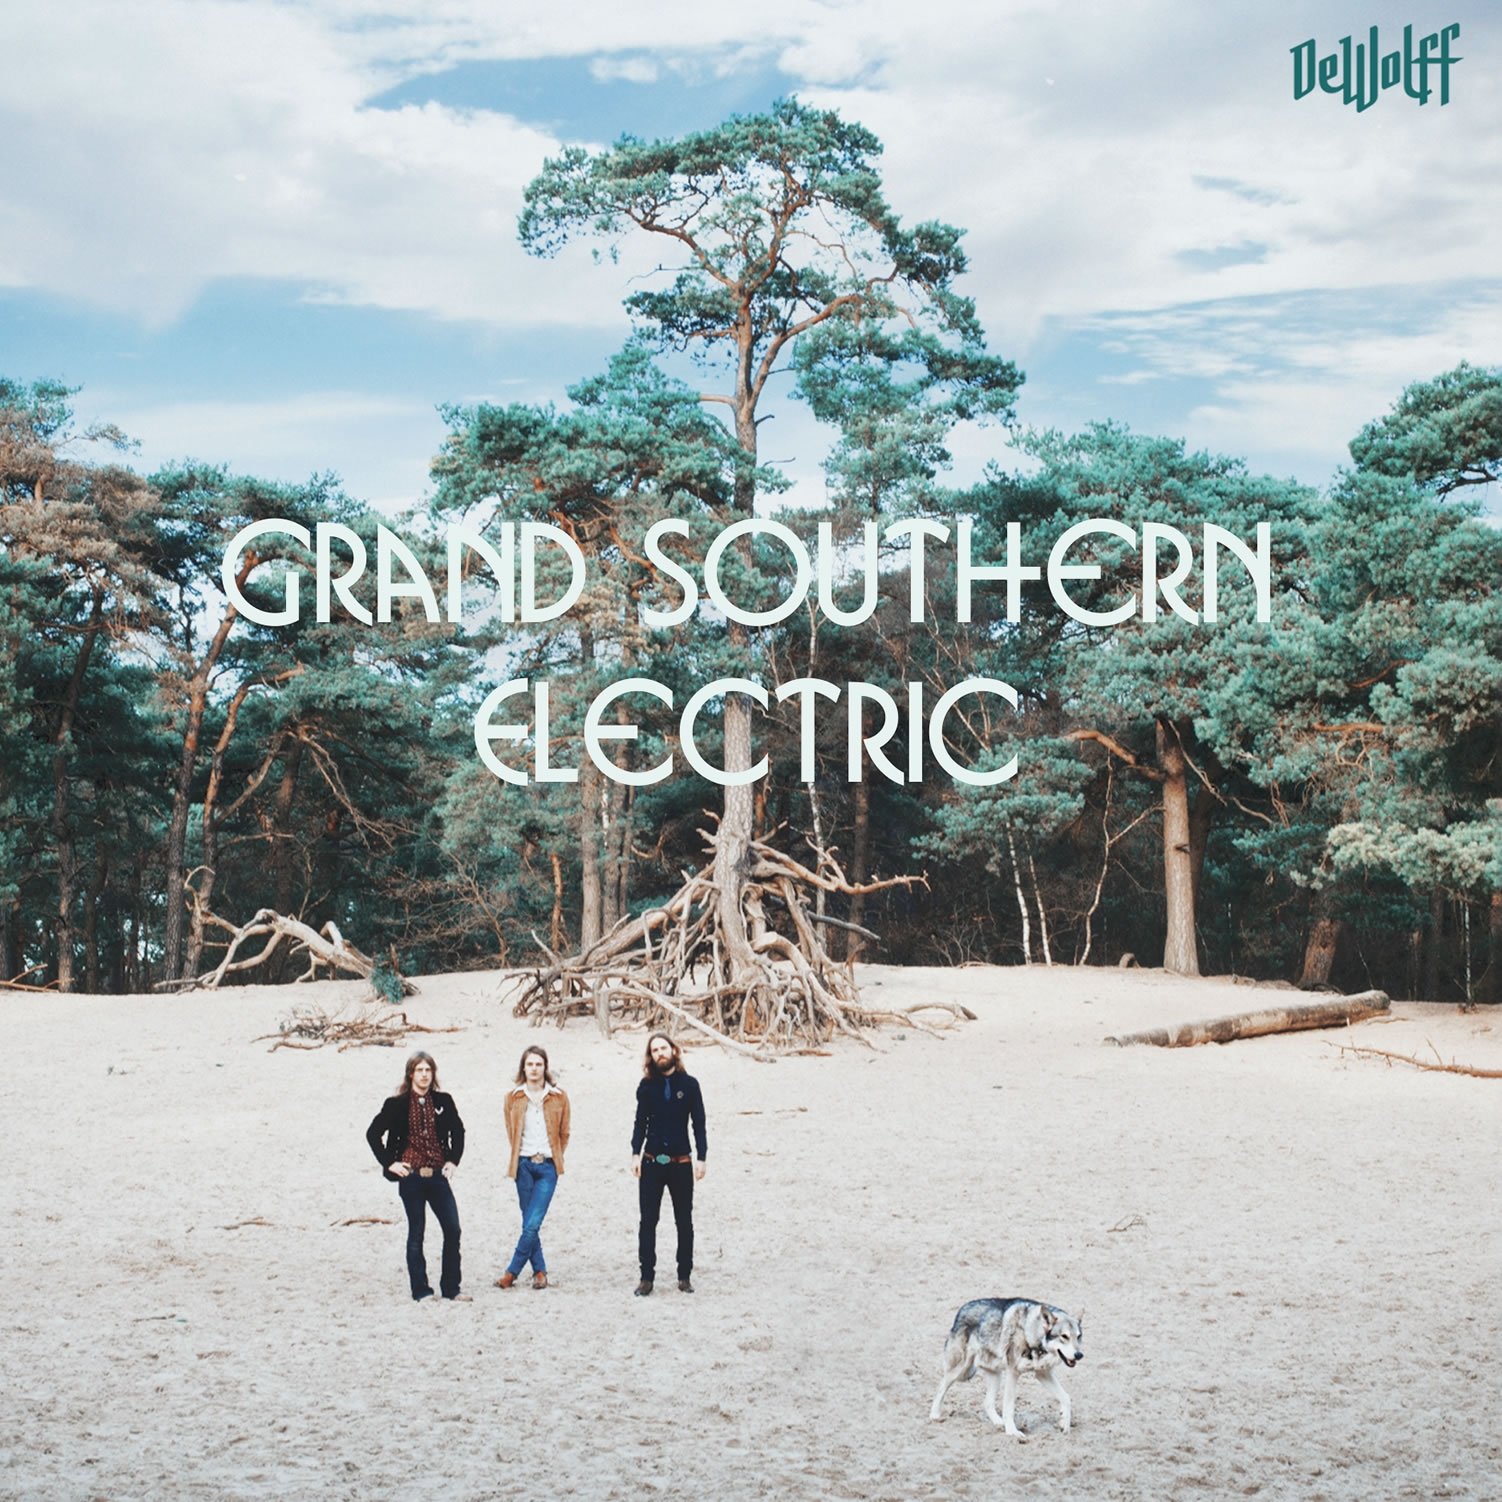 DeWolff-Grand Southern Electric-CD-FLAC-2014-401